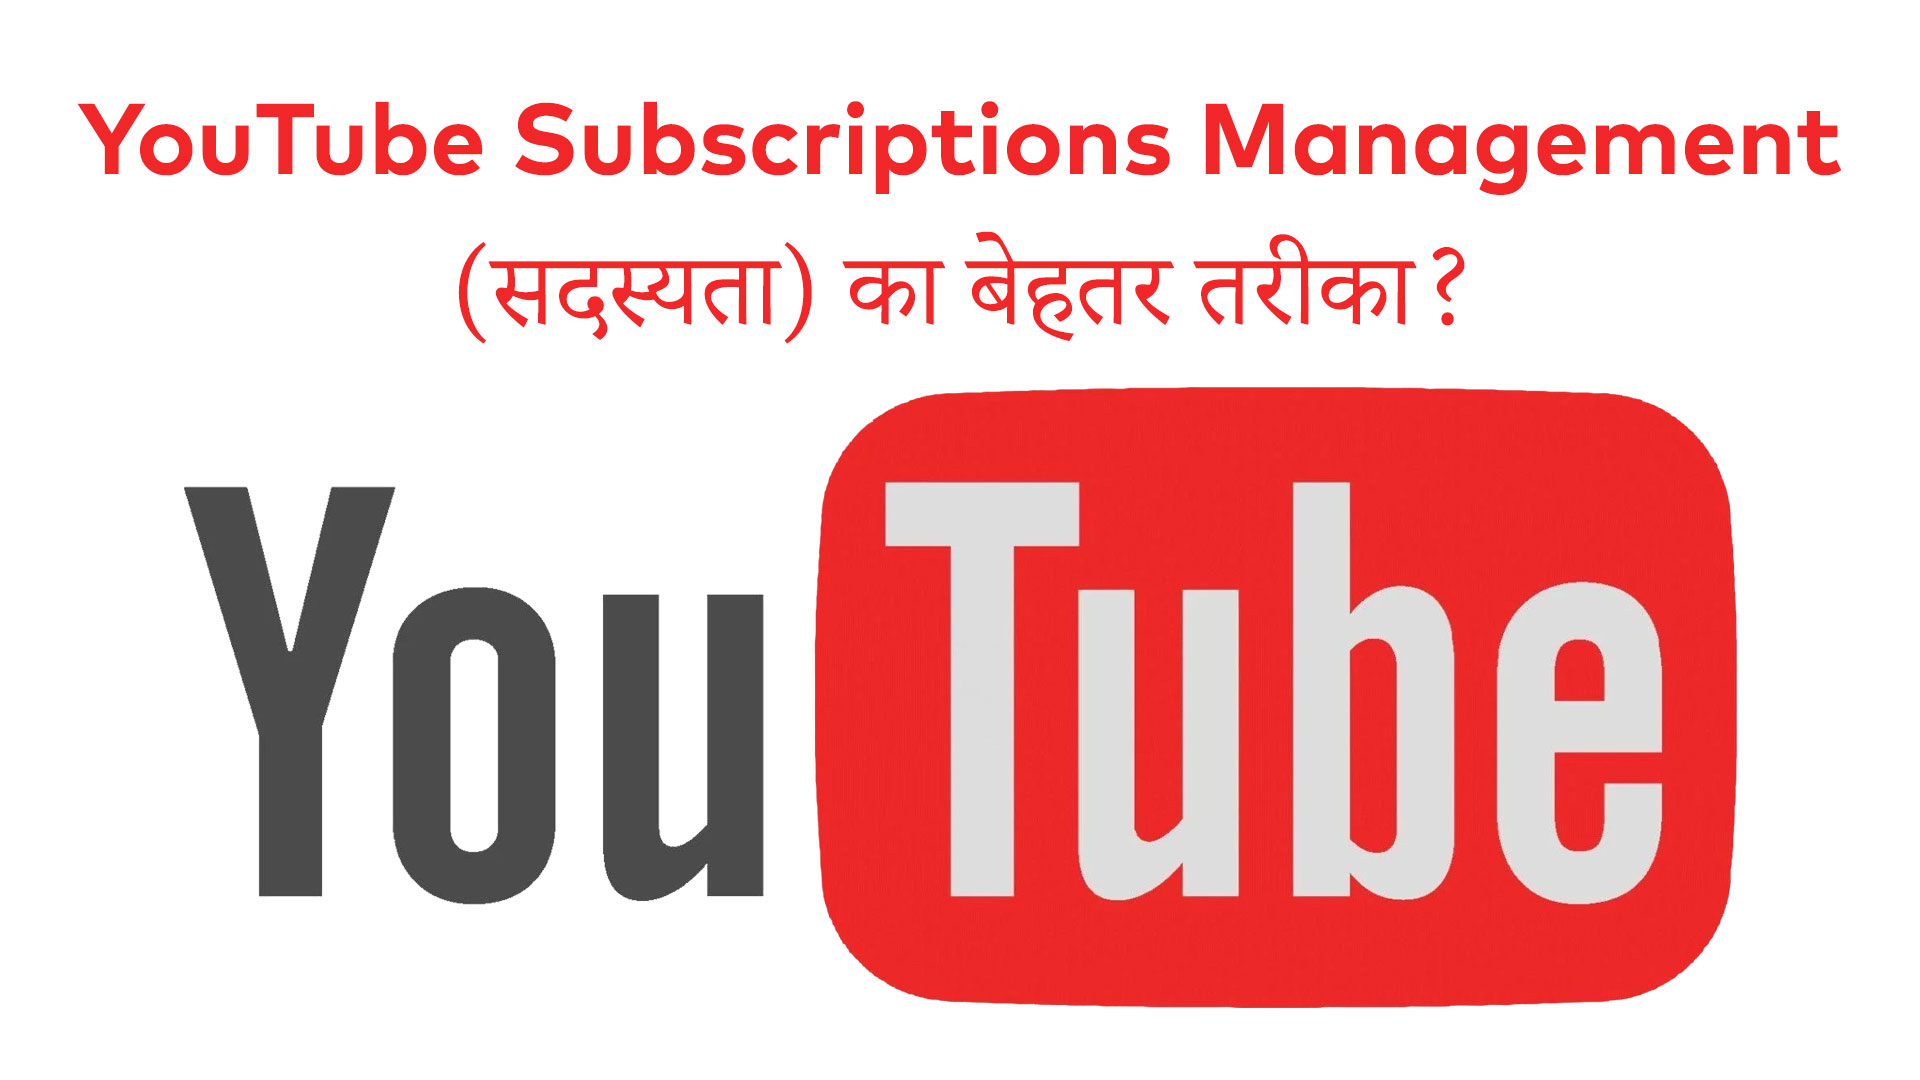 YouTube Subscriptions Management